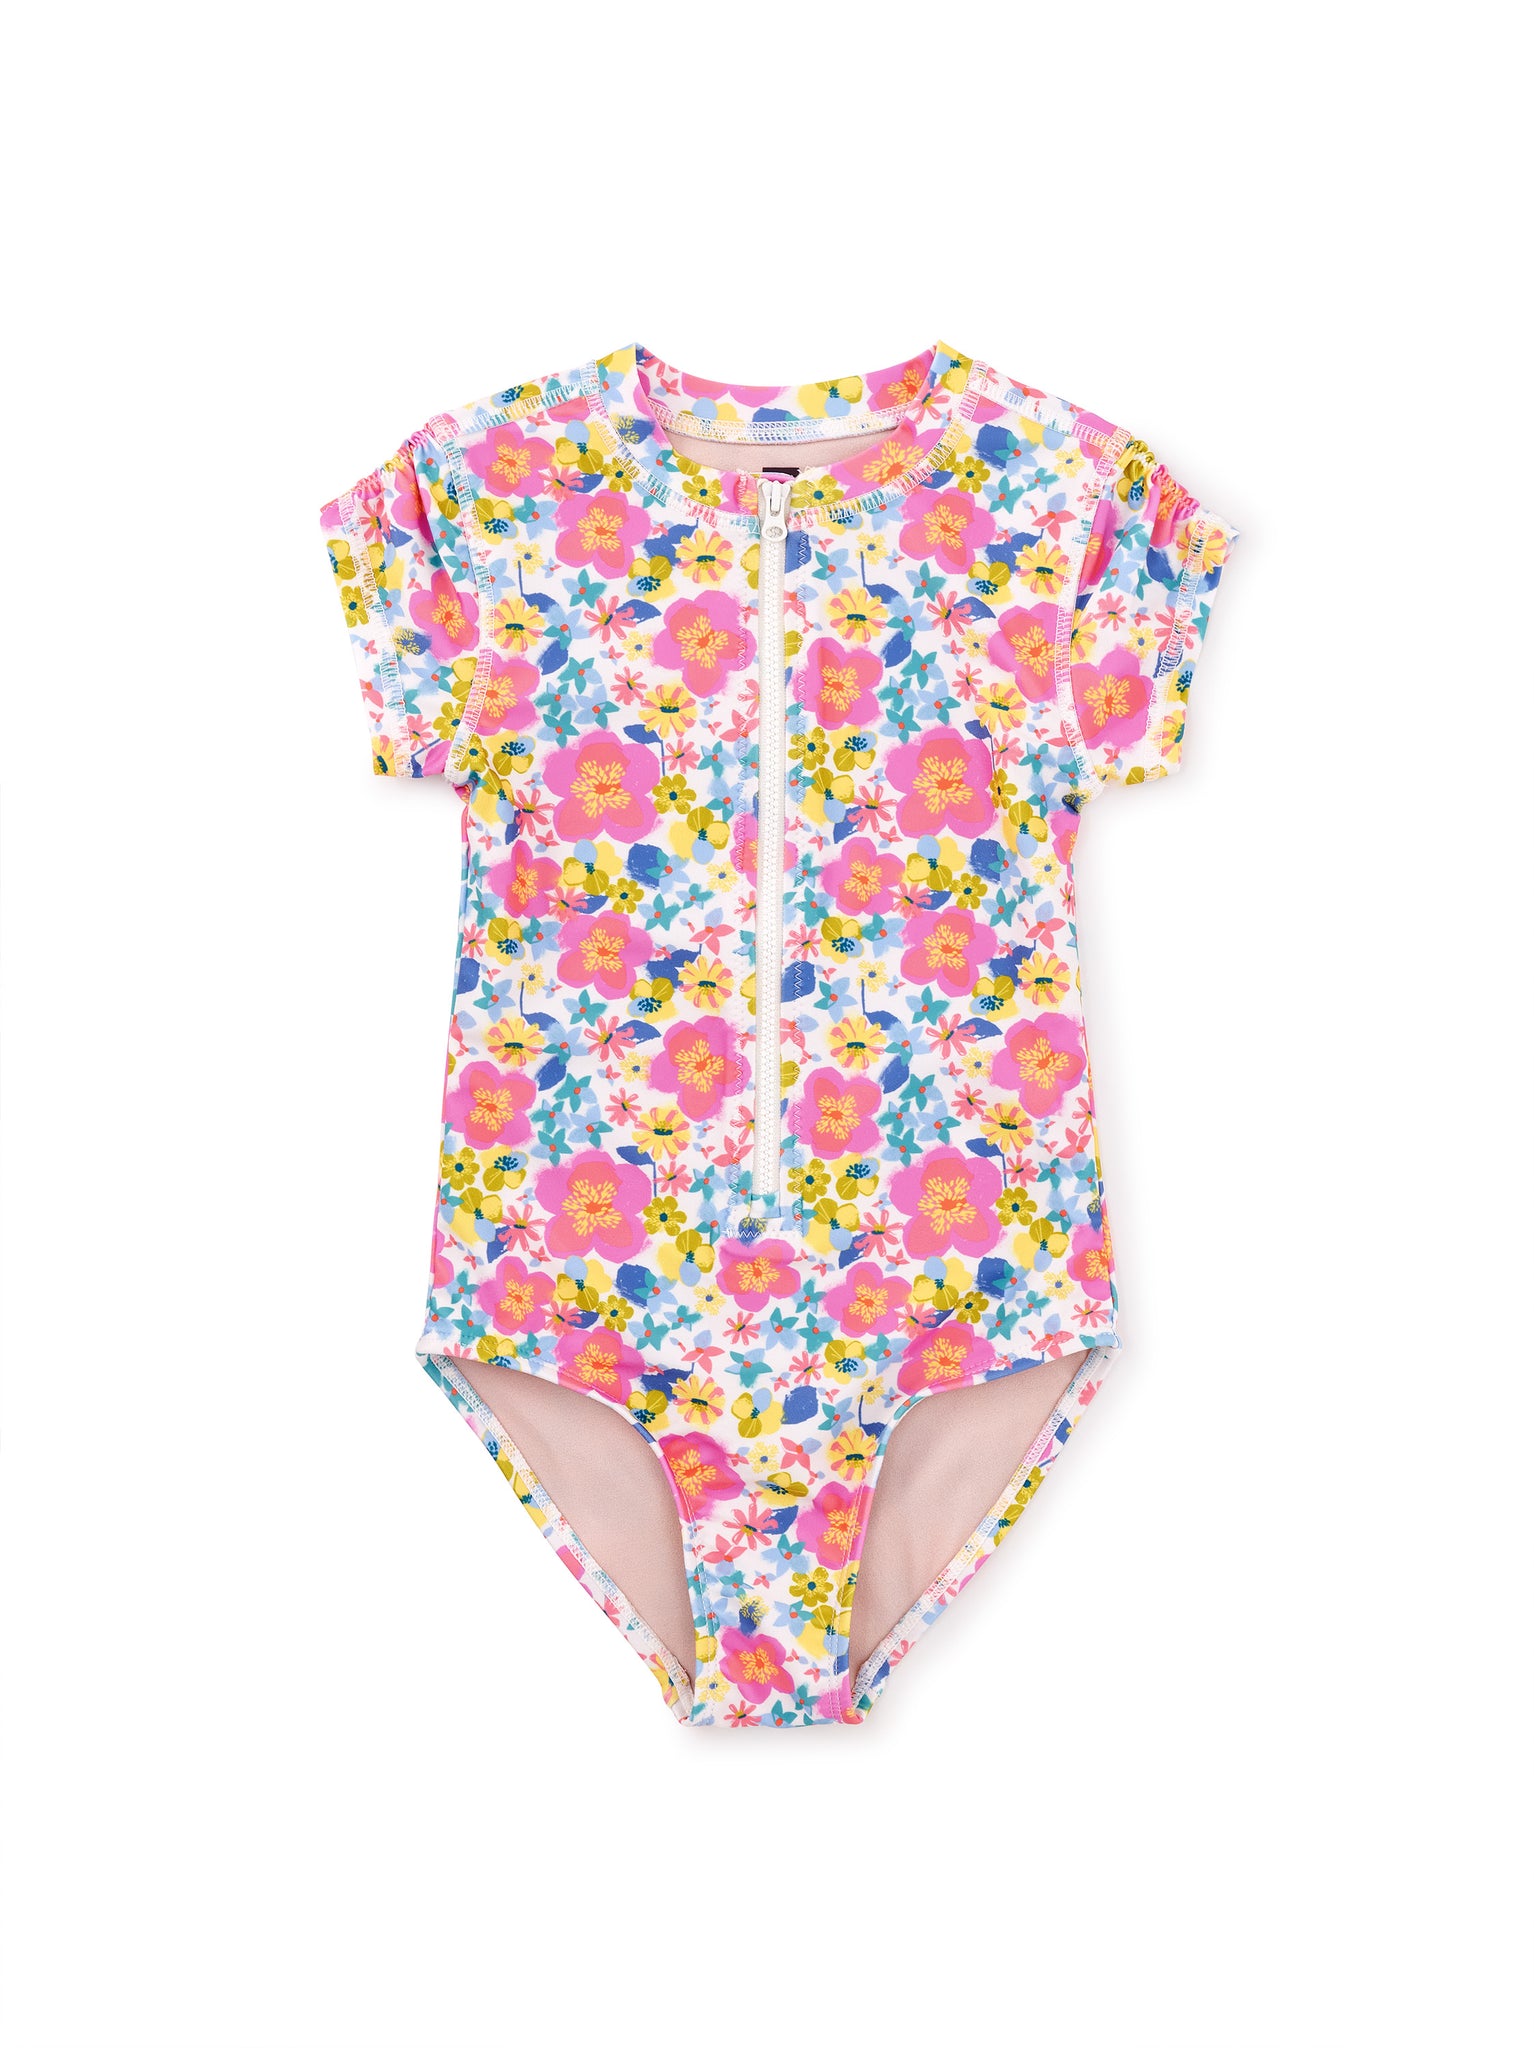 Rash Guard One-Piece Swimsuit/Tropical Hibiscus Floral